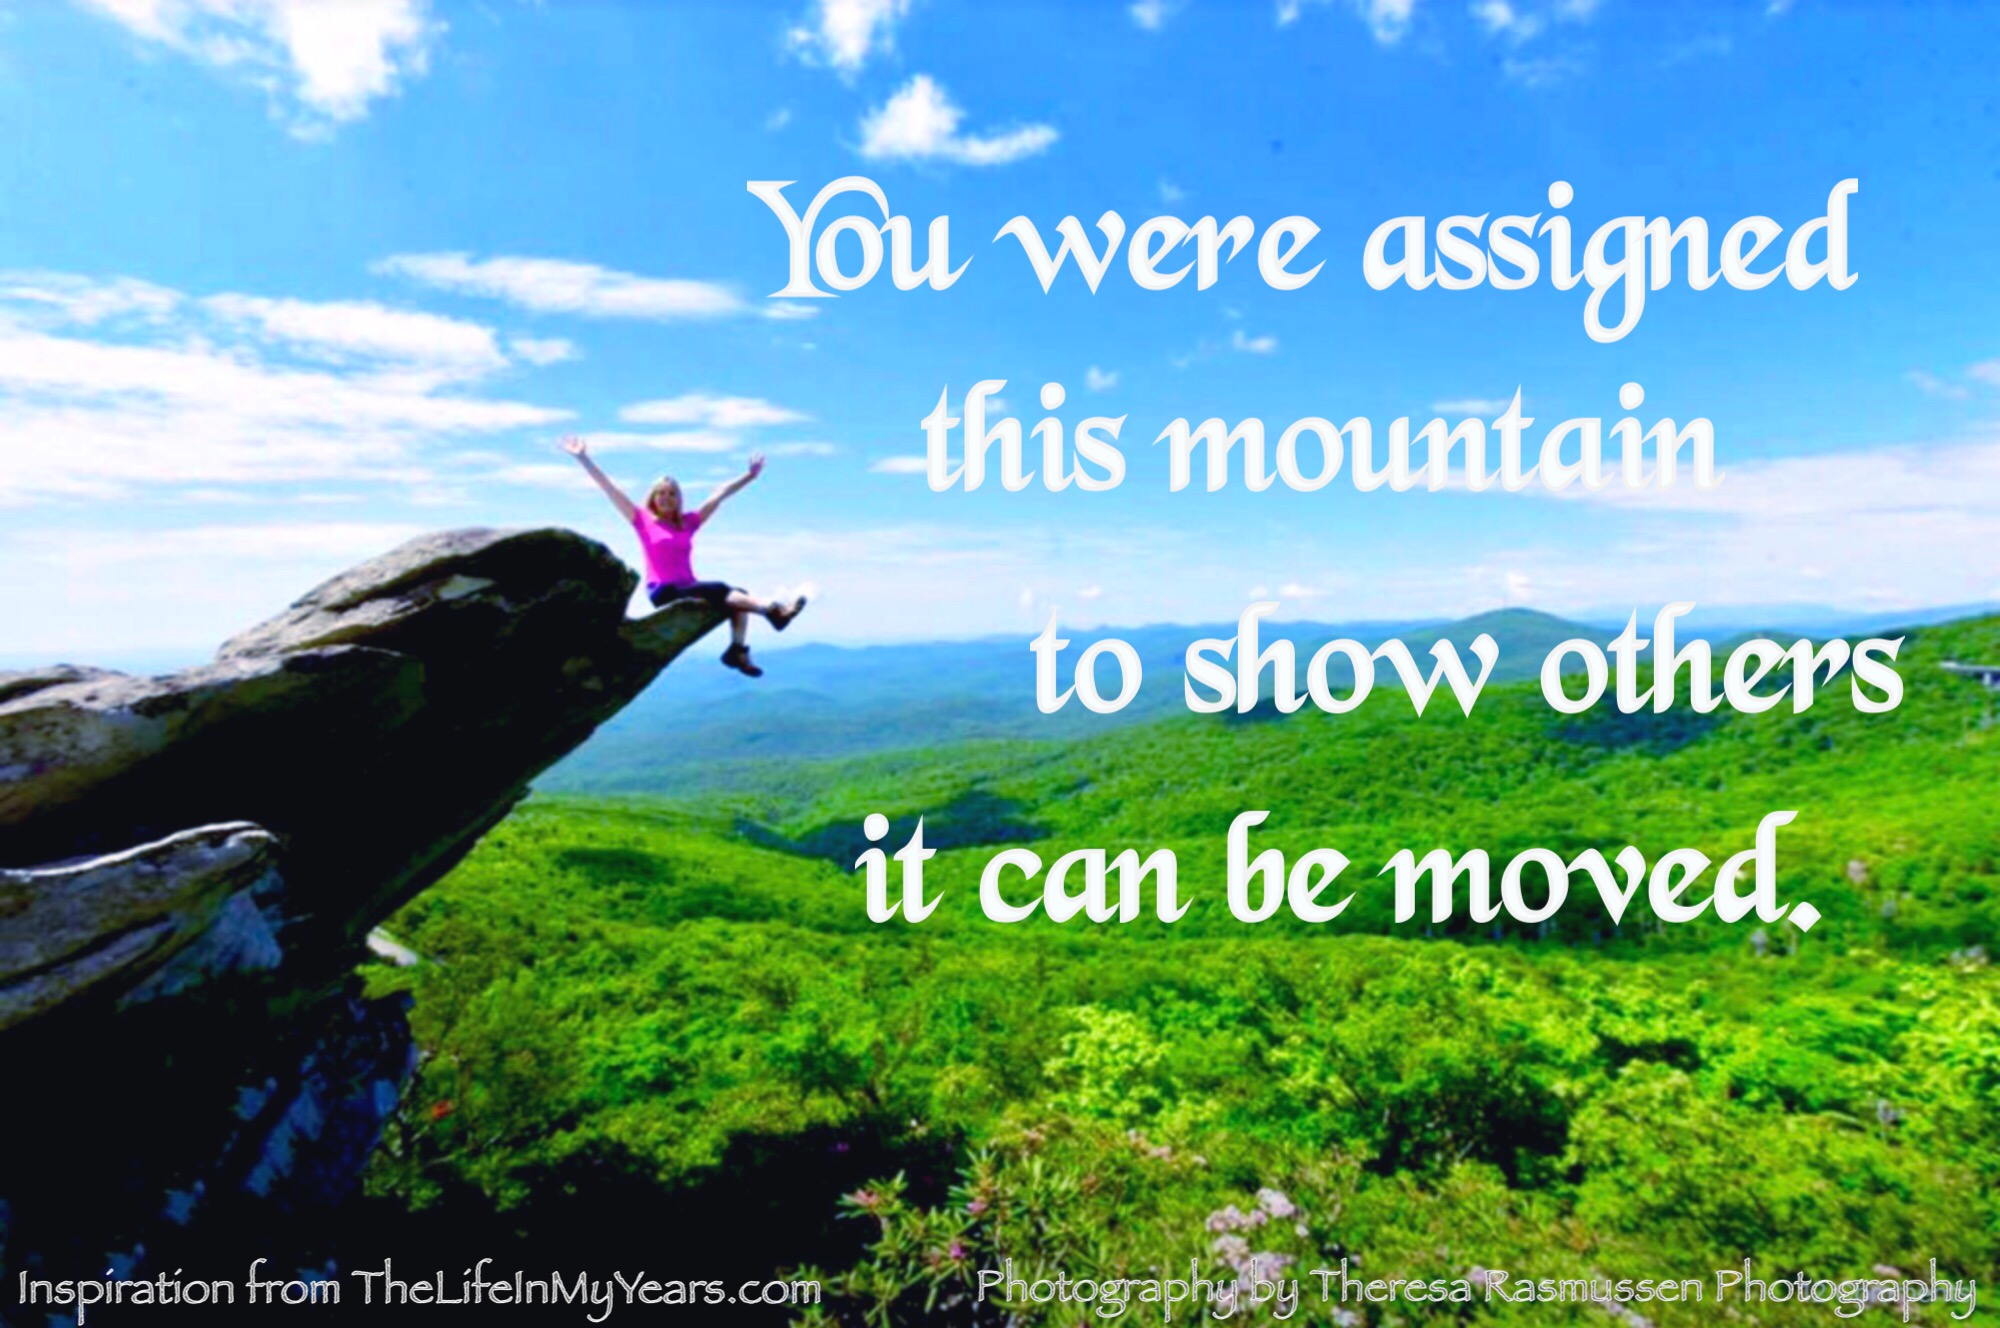 You were assigned this mountain to show others it can be moved.